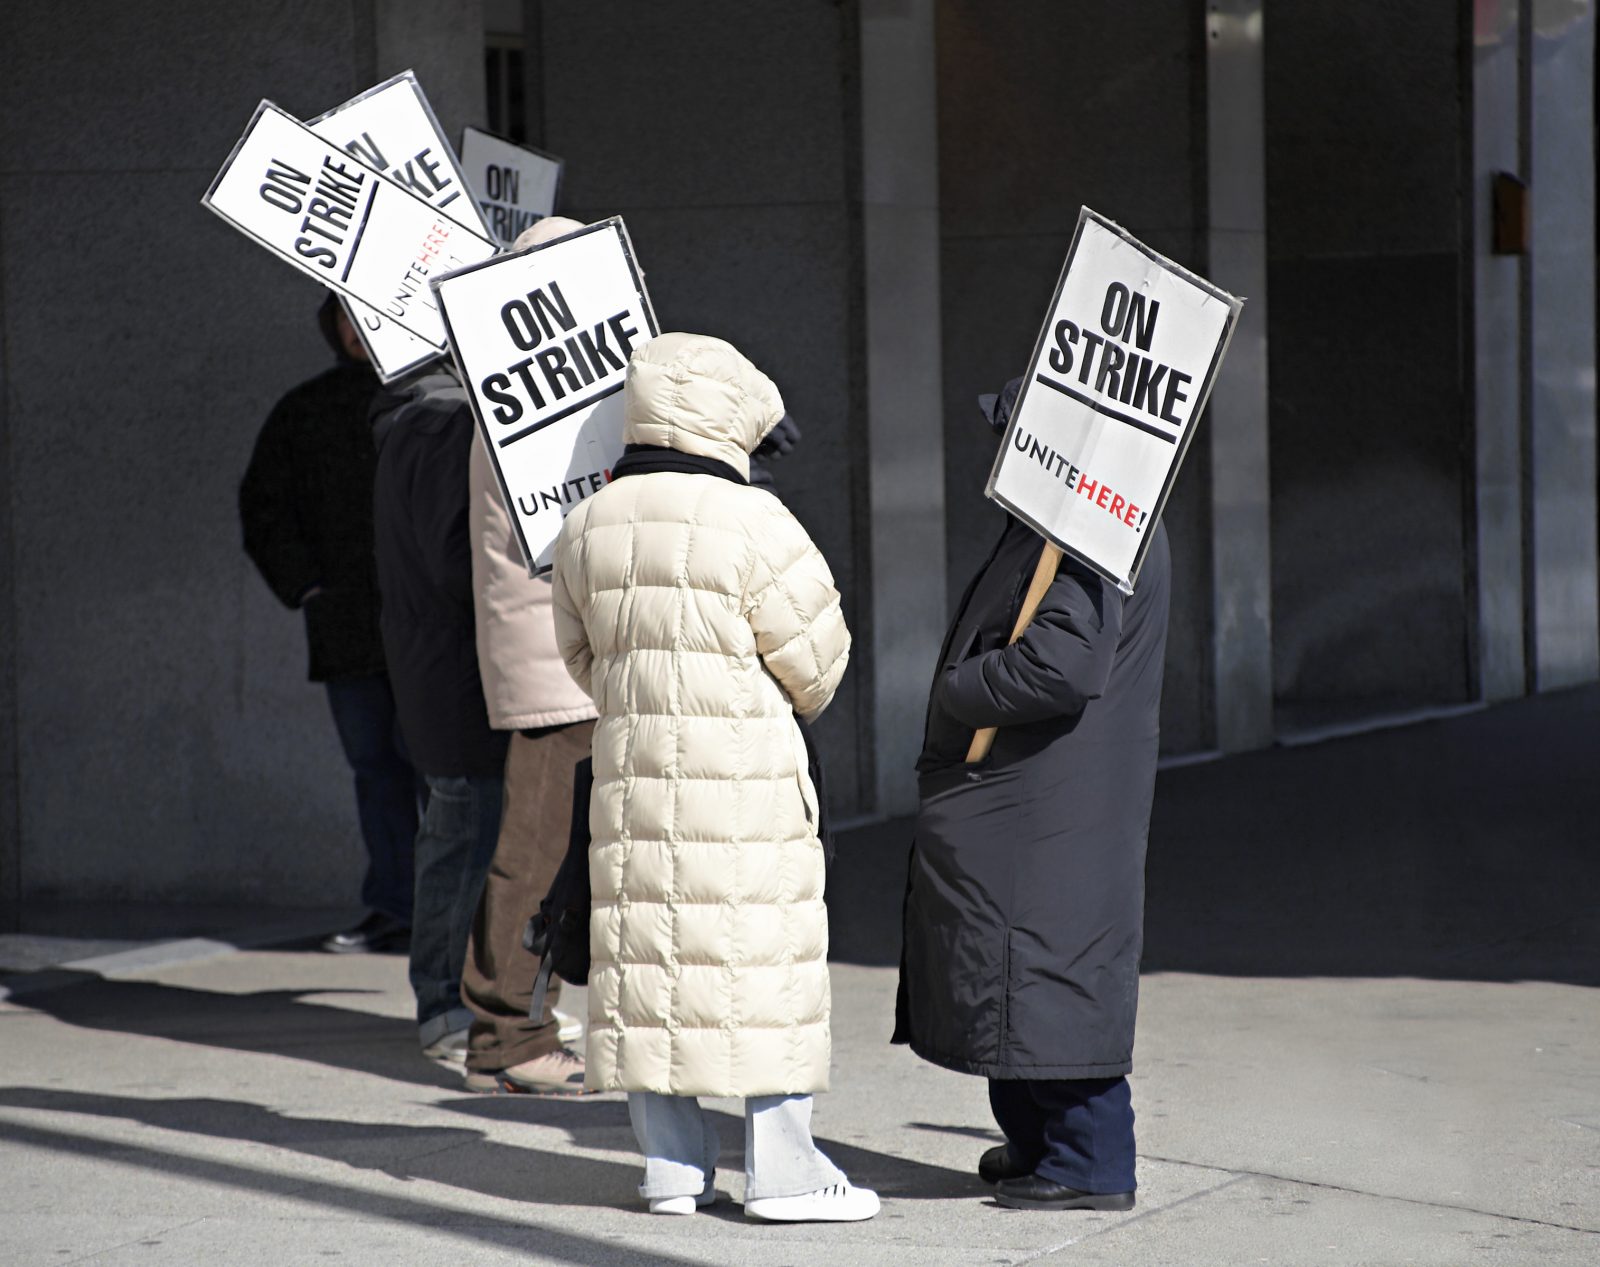 Workers stand outside holding picket signs next to a building.